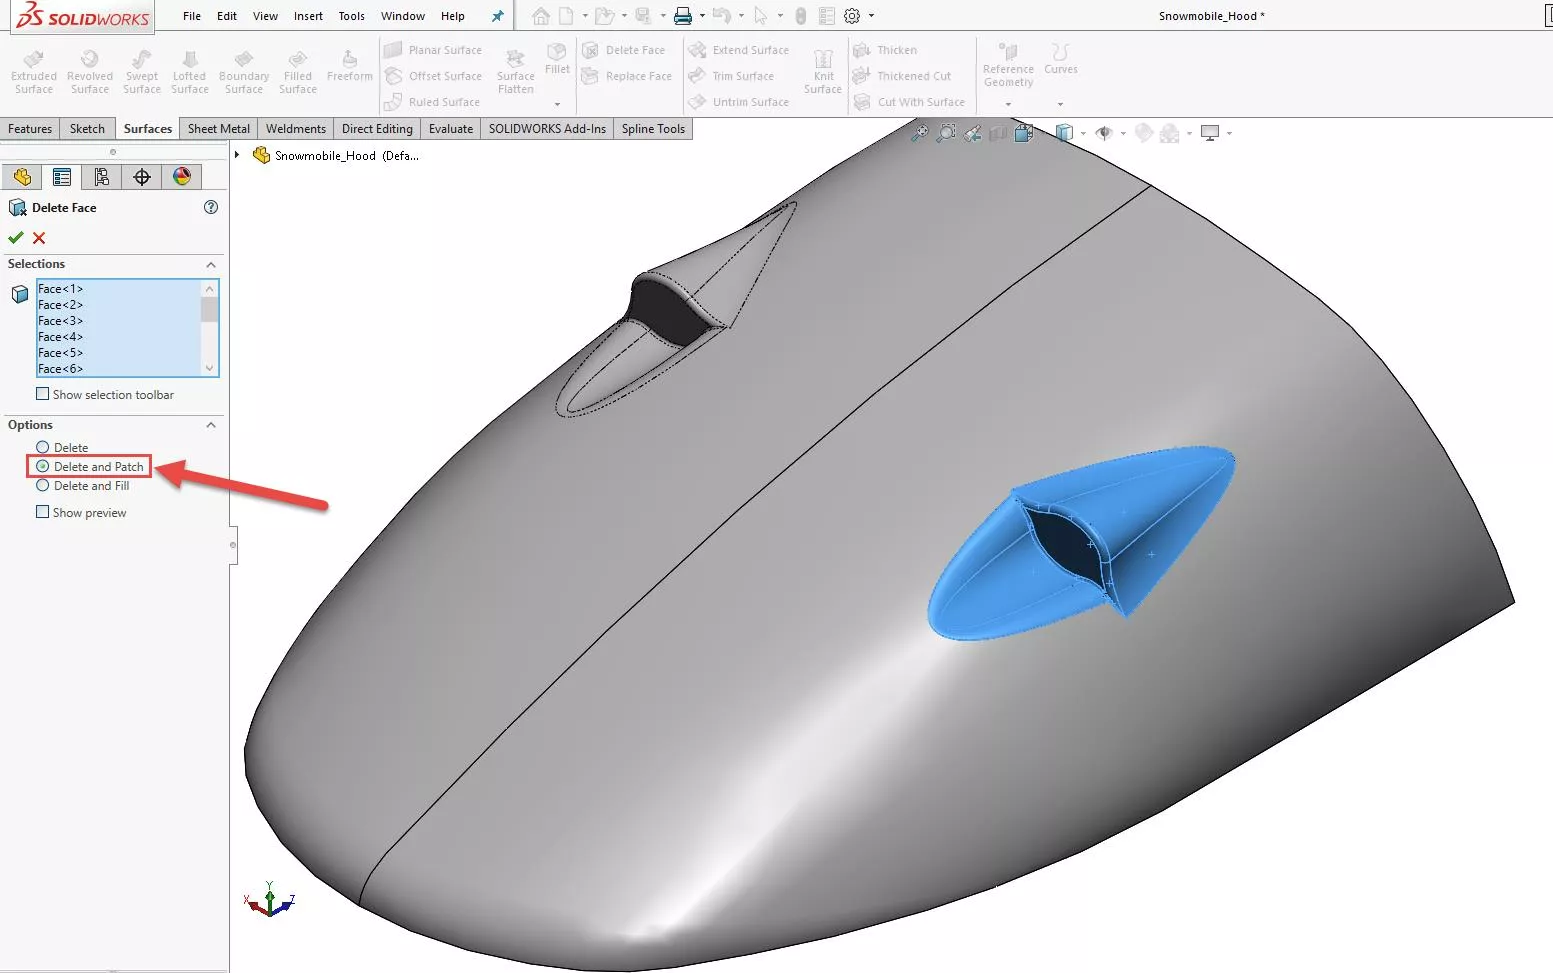 Inserting SOLIDWORKS Delete Face Feature and changing to Delete and Patch 